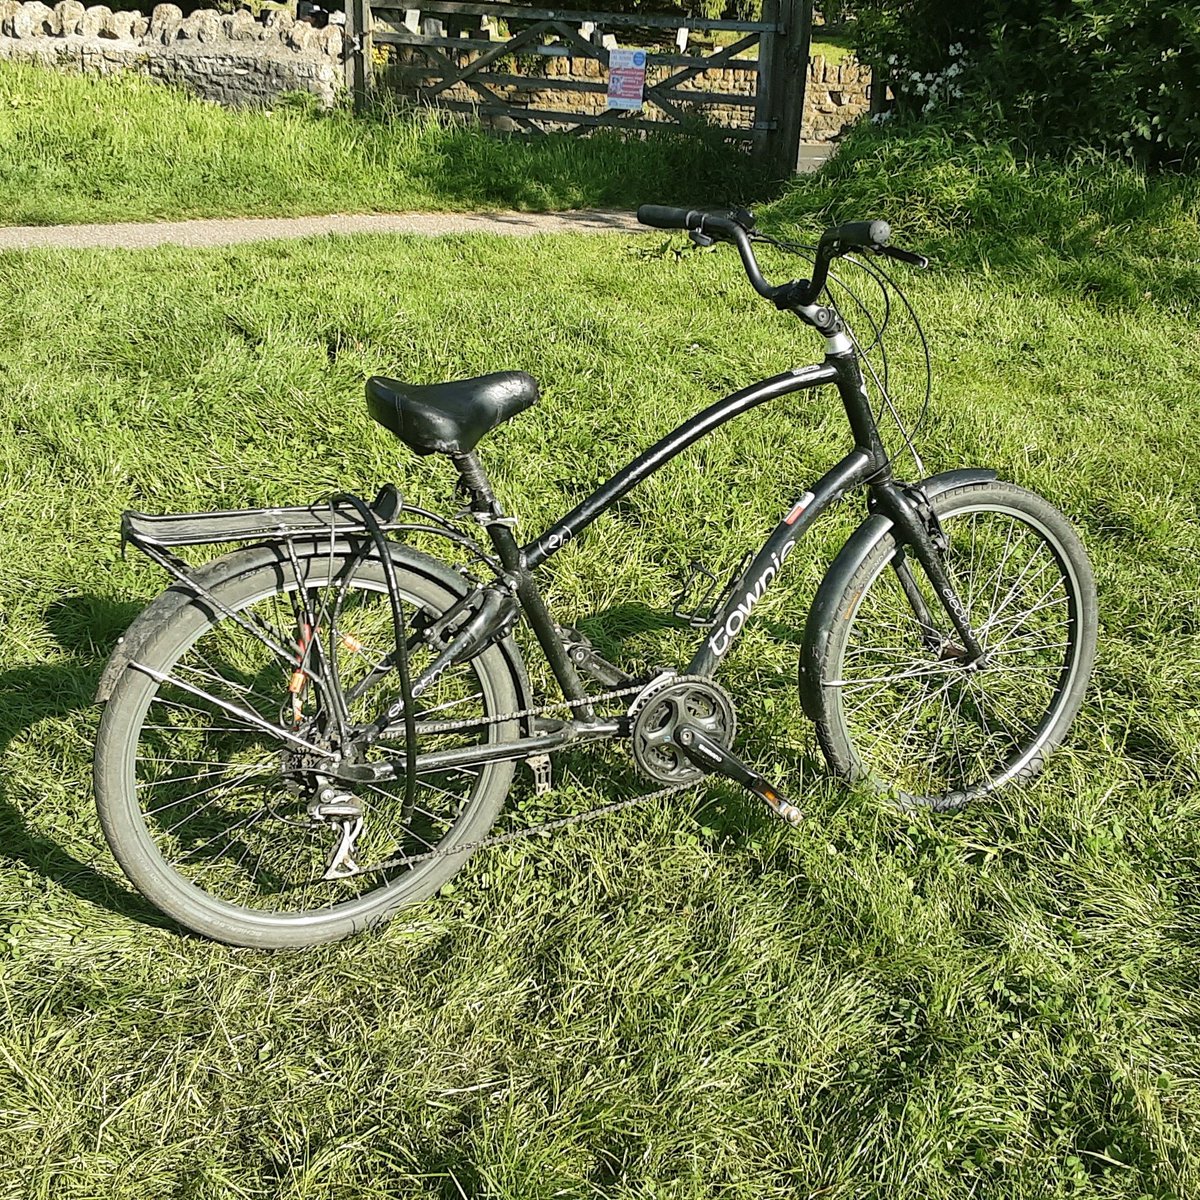 An unusual cruiser style bike is the 1st of todays services to arrived. 

#cycling #bicycle #repair #buyitoffaboat #canaltraders #Kennetandavon #bathampton #bath.